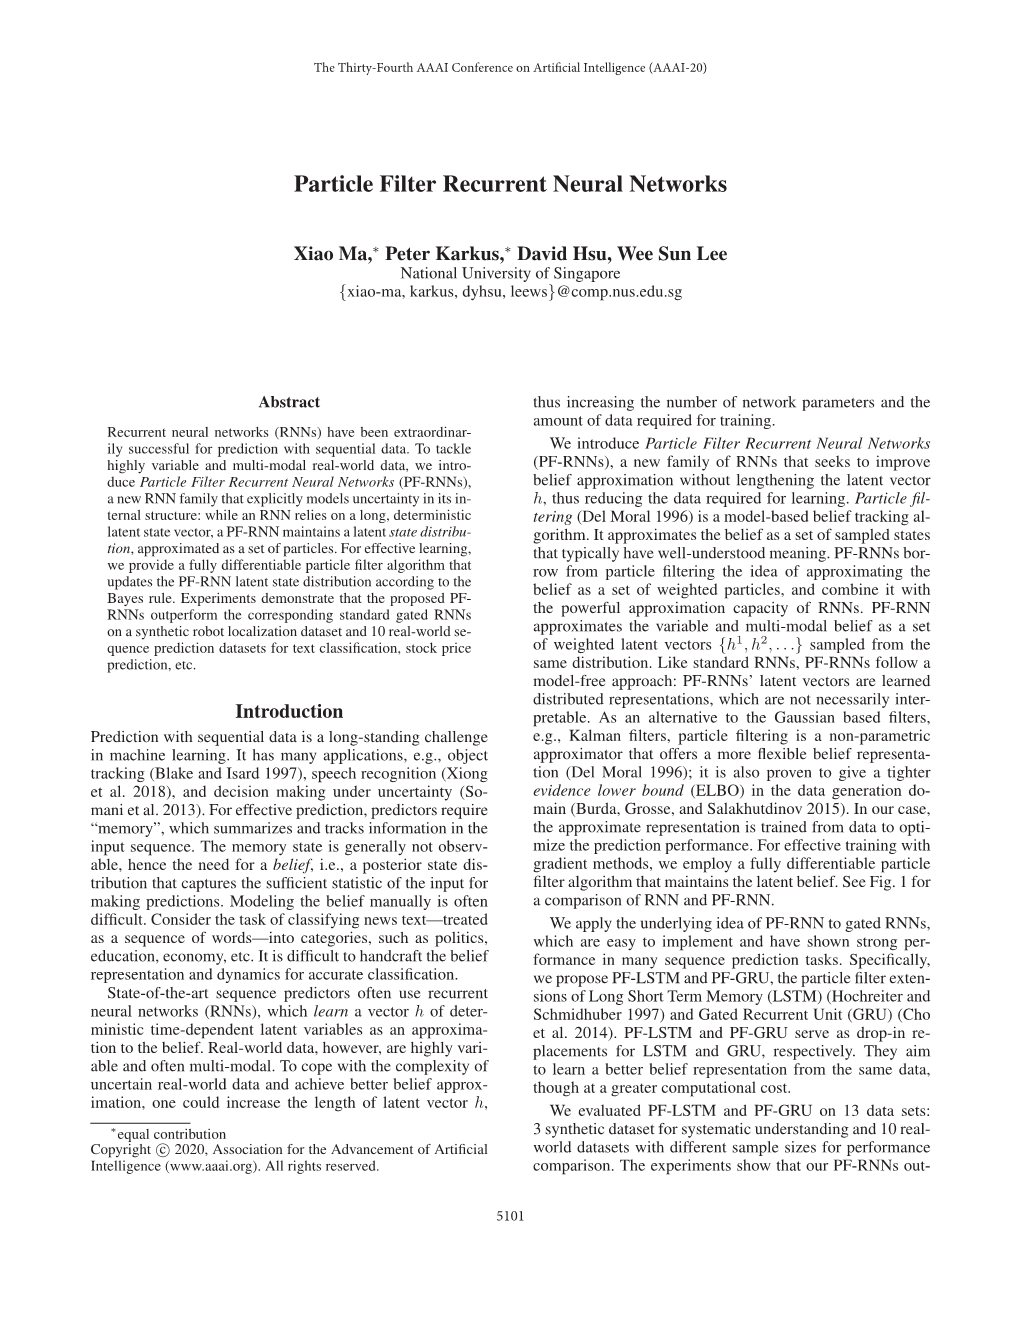 Particle Filter Recurrent Neural Networks